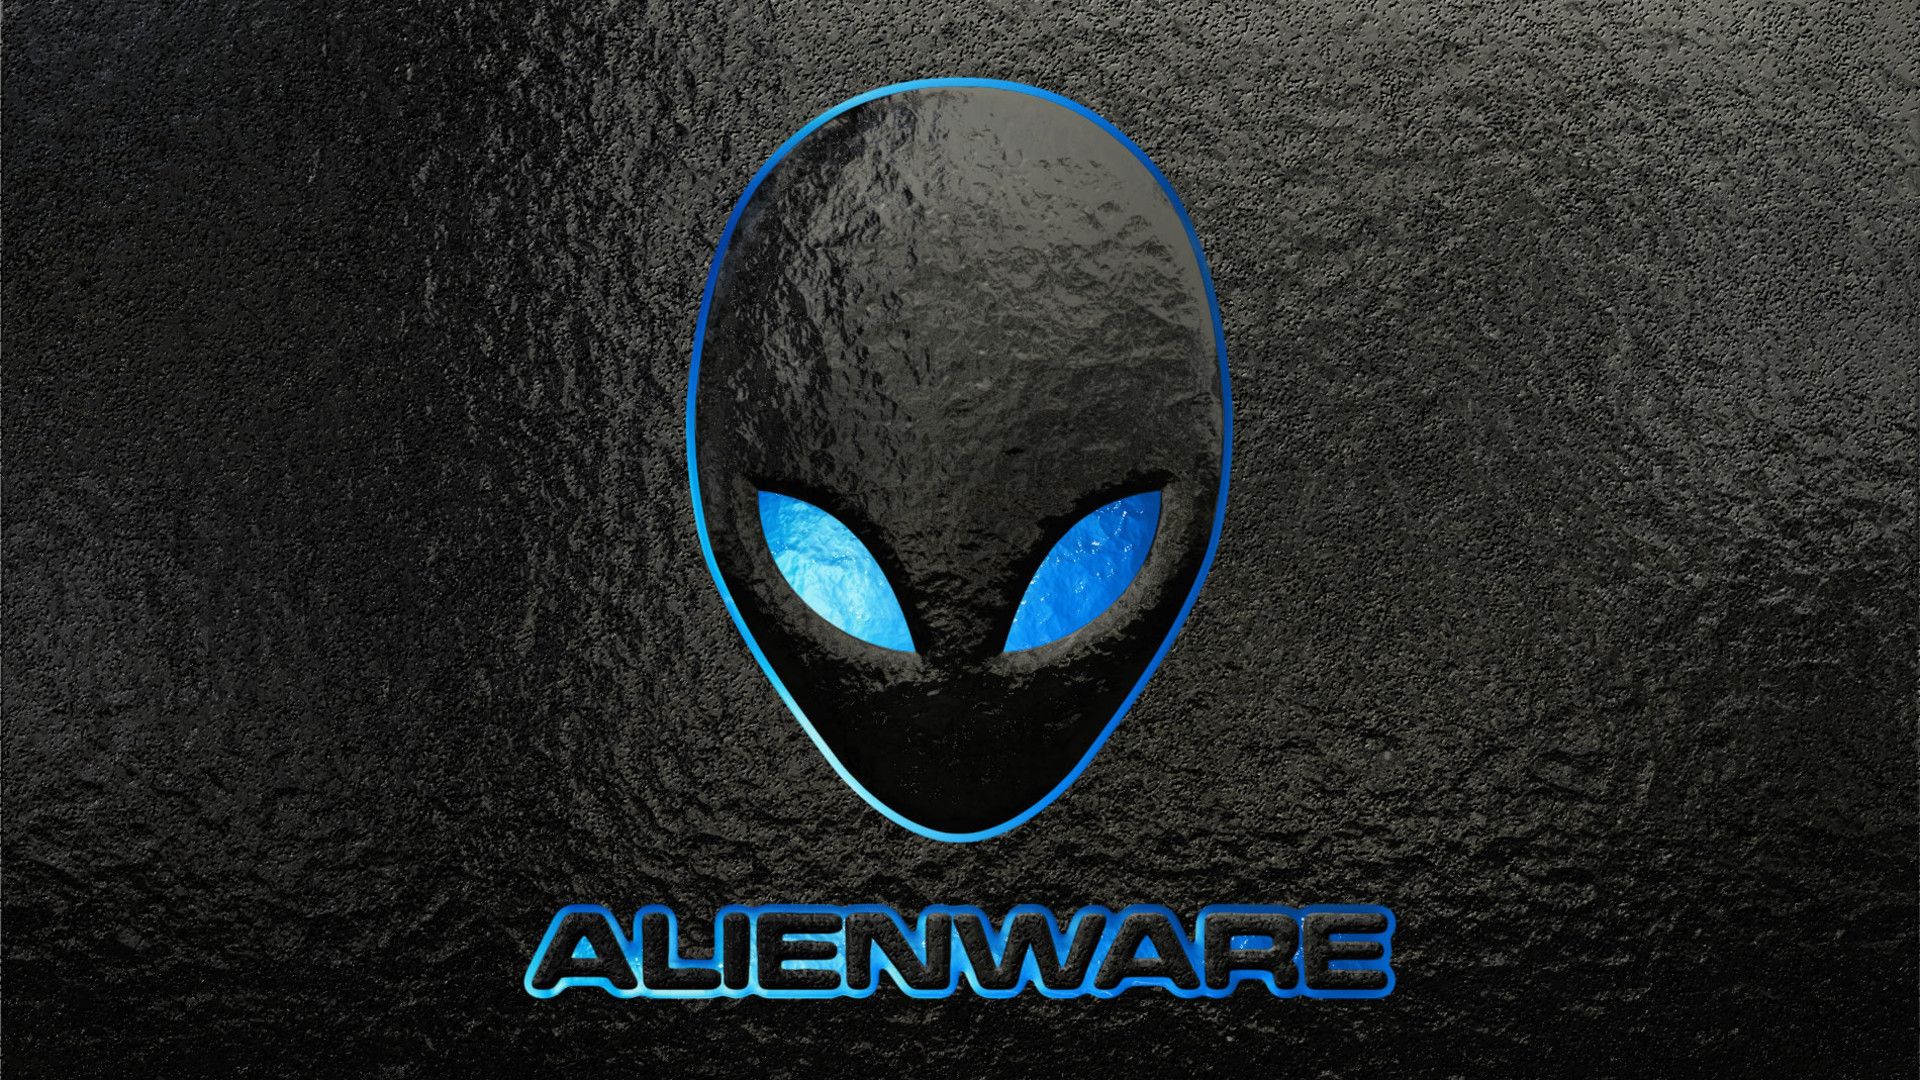 Res: 1920x HD background alienware wallpaper cool 1080p windows wallpaper smart phone background photo high qualit. Alienware, Wallpaper, HD background